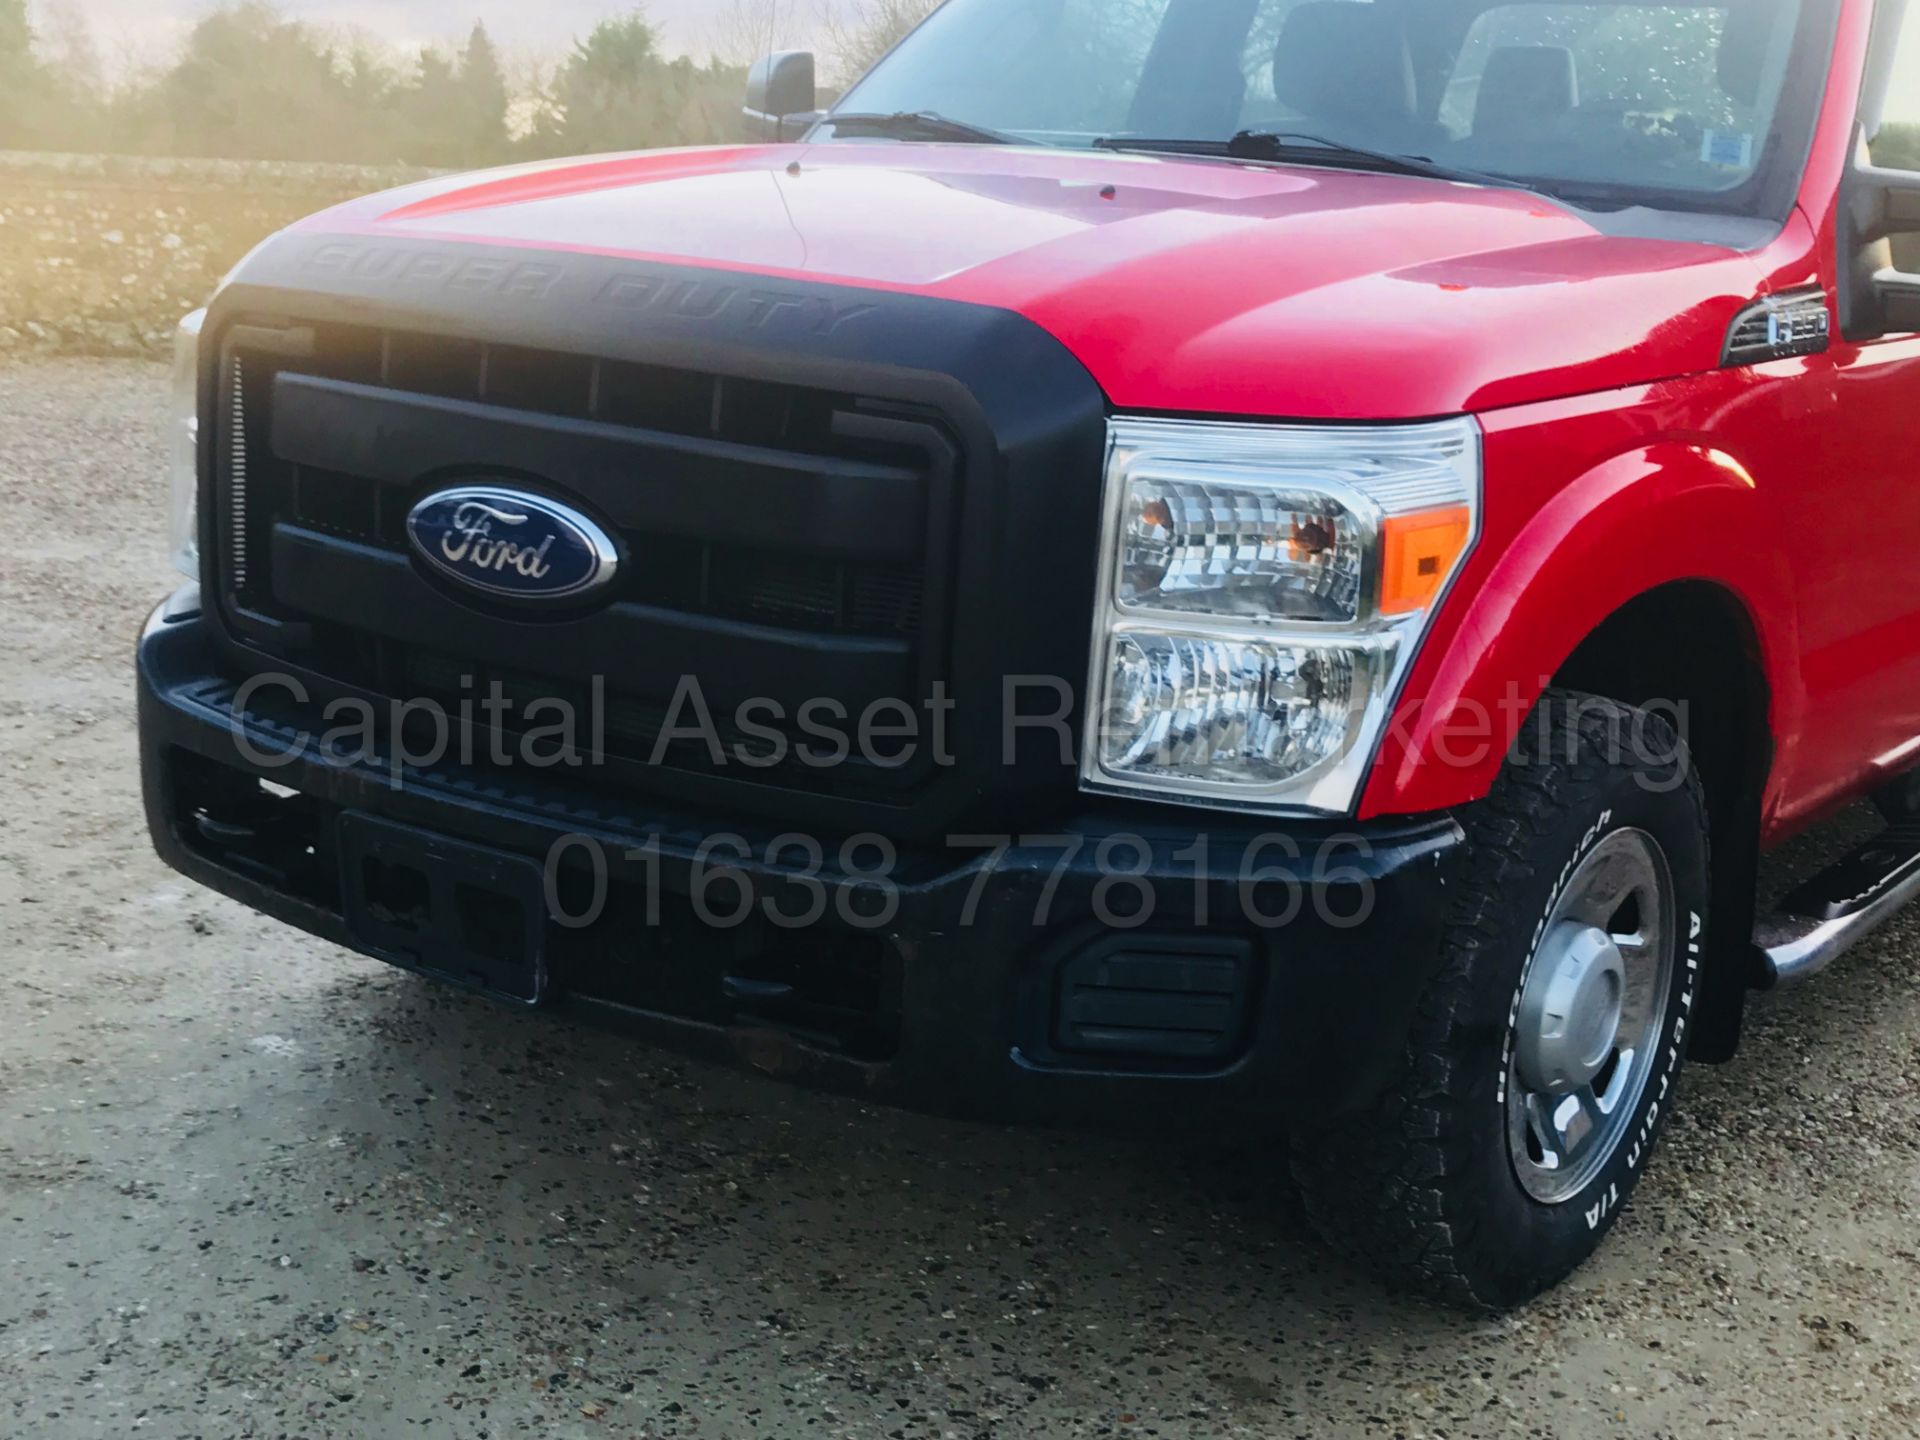 (On Sale) FORD F-250 SUPER DUTY 6.2 V8 FLEX FUEL (2011) XL - DOUBLE CAB PICK-UP **AIR CON - AUTO** - Image 6 of 27